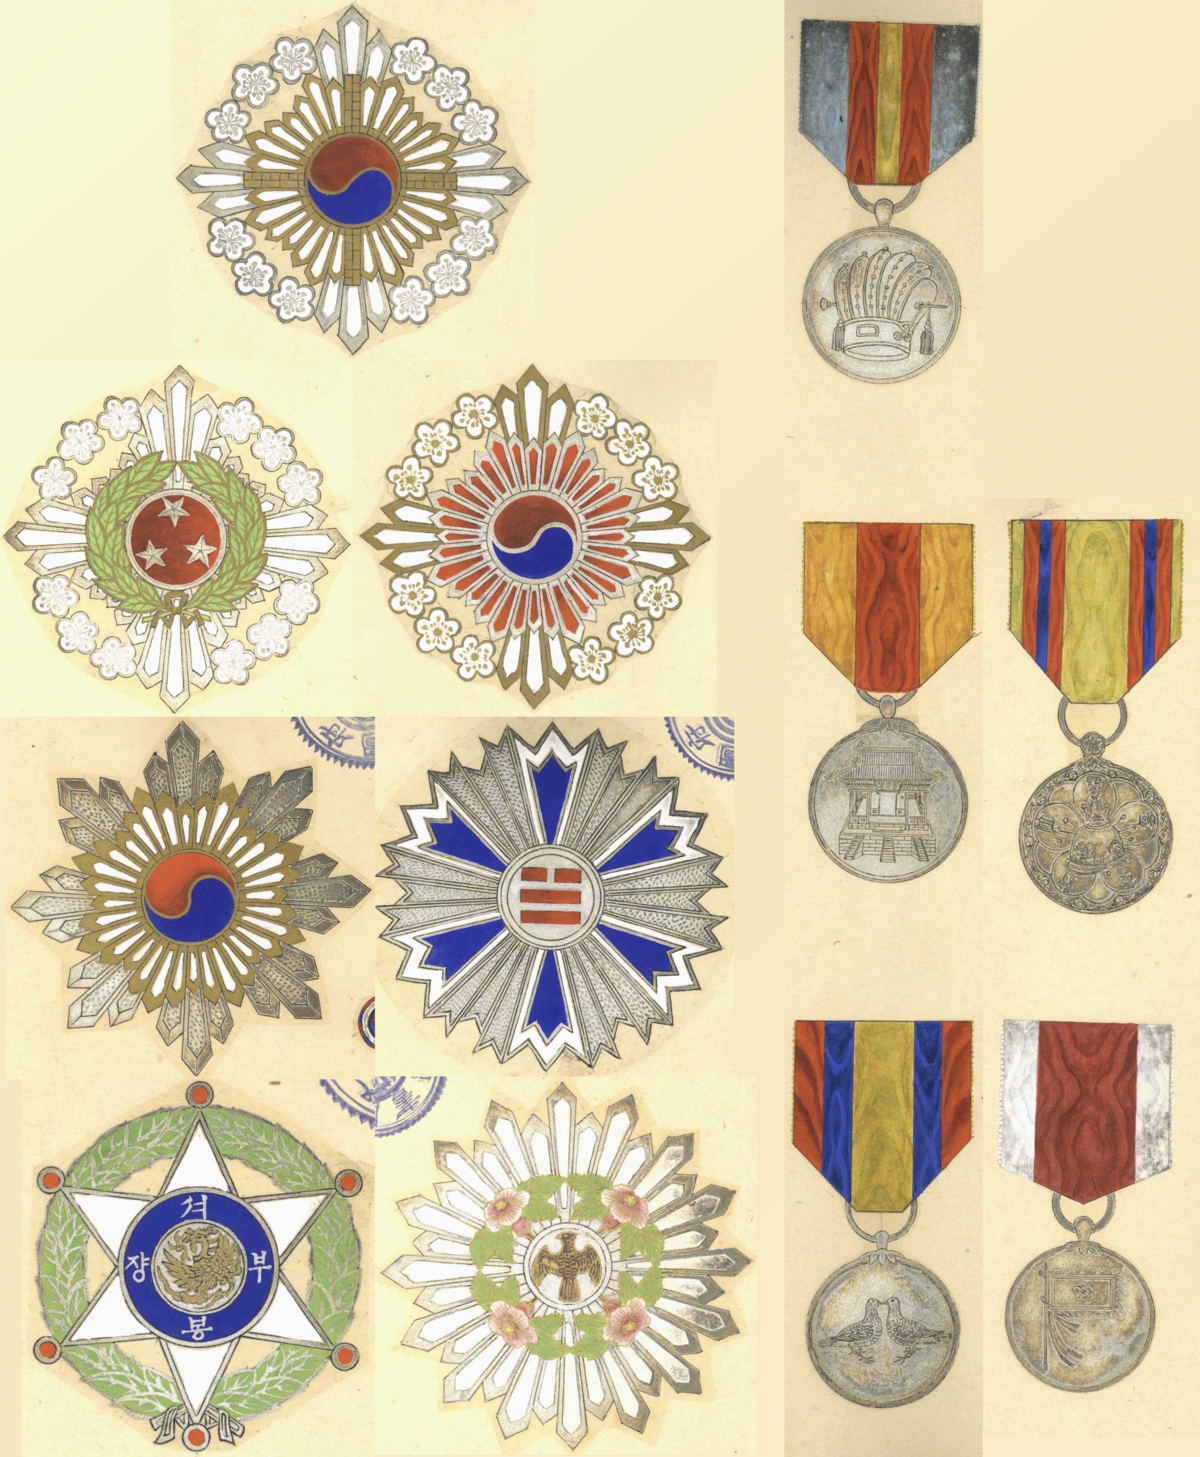 Orders, decorations, and medals of the Korean Empire - Wikipedia